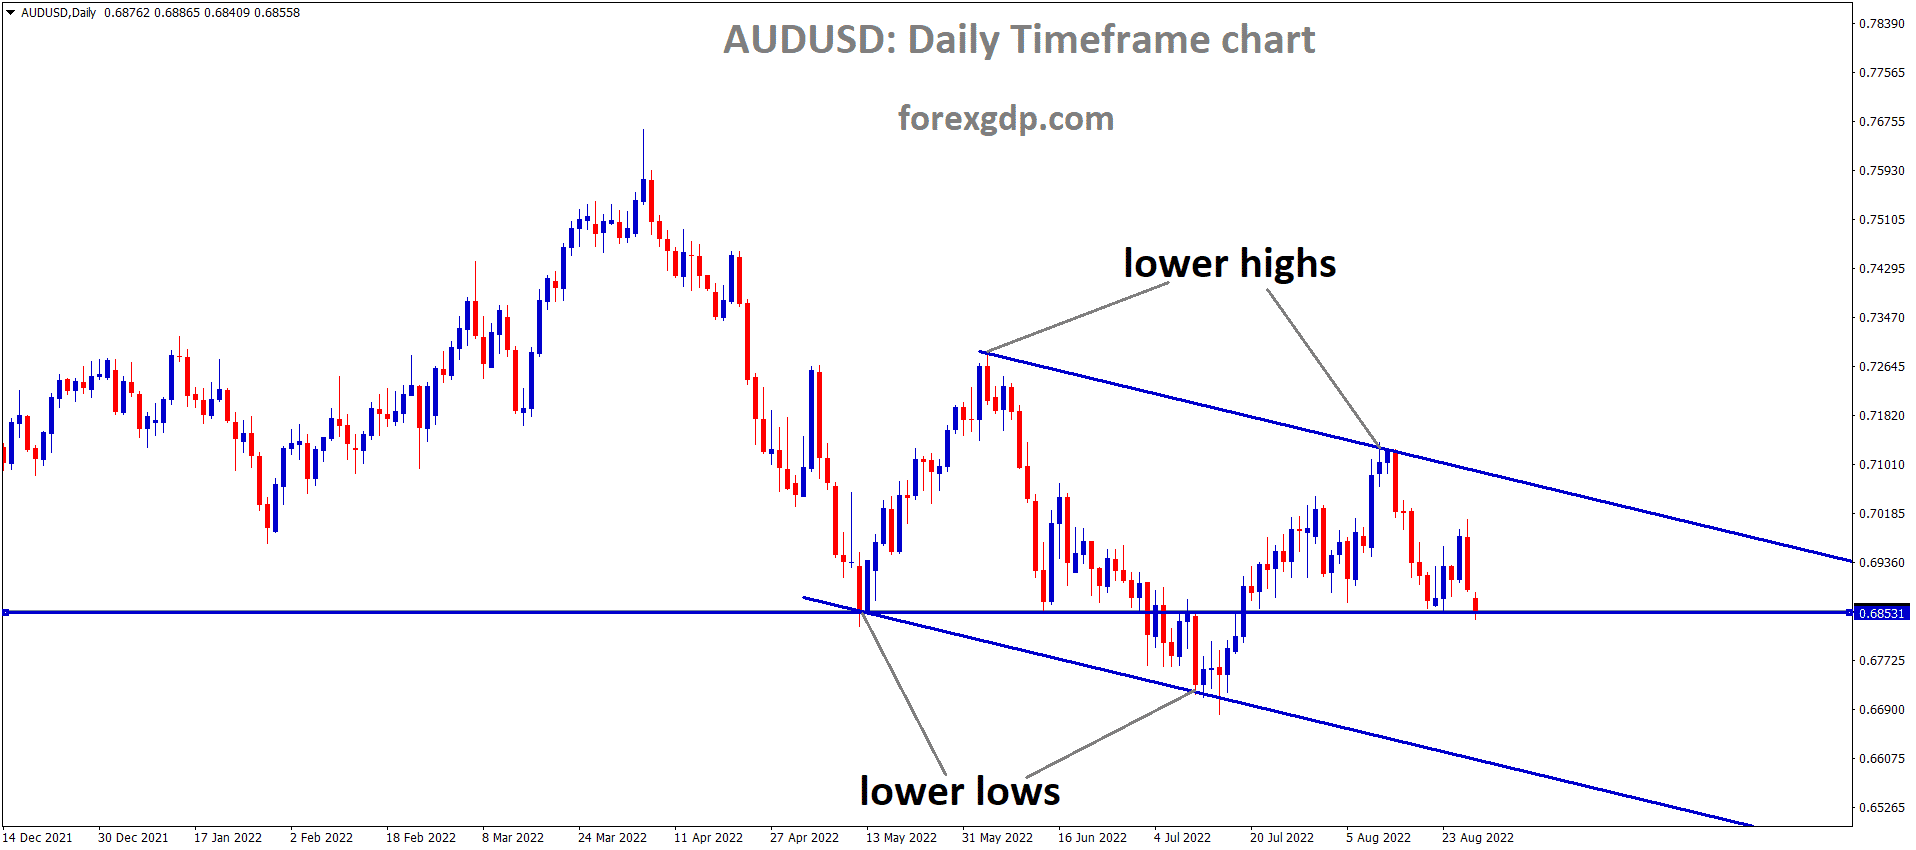 AUDUSD is moving in the Descending channel and the market has fallen from the Lower high area